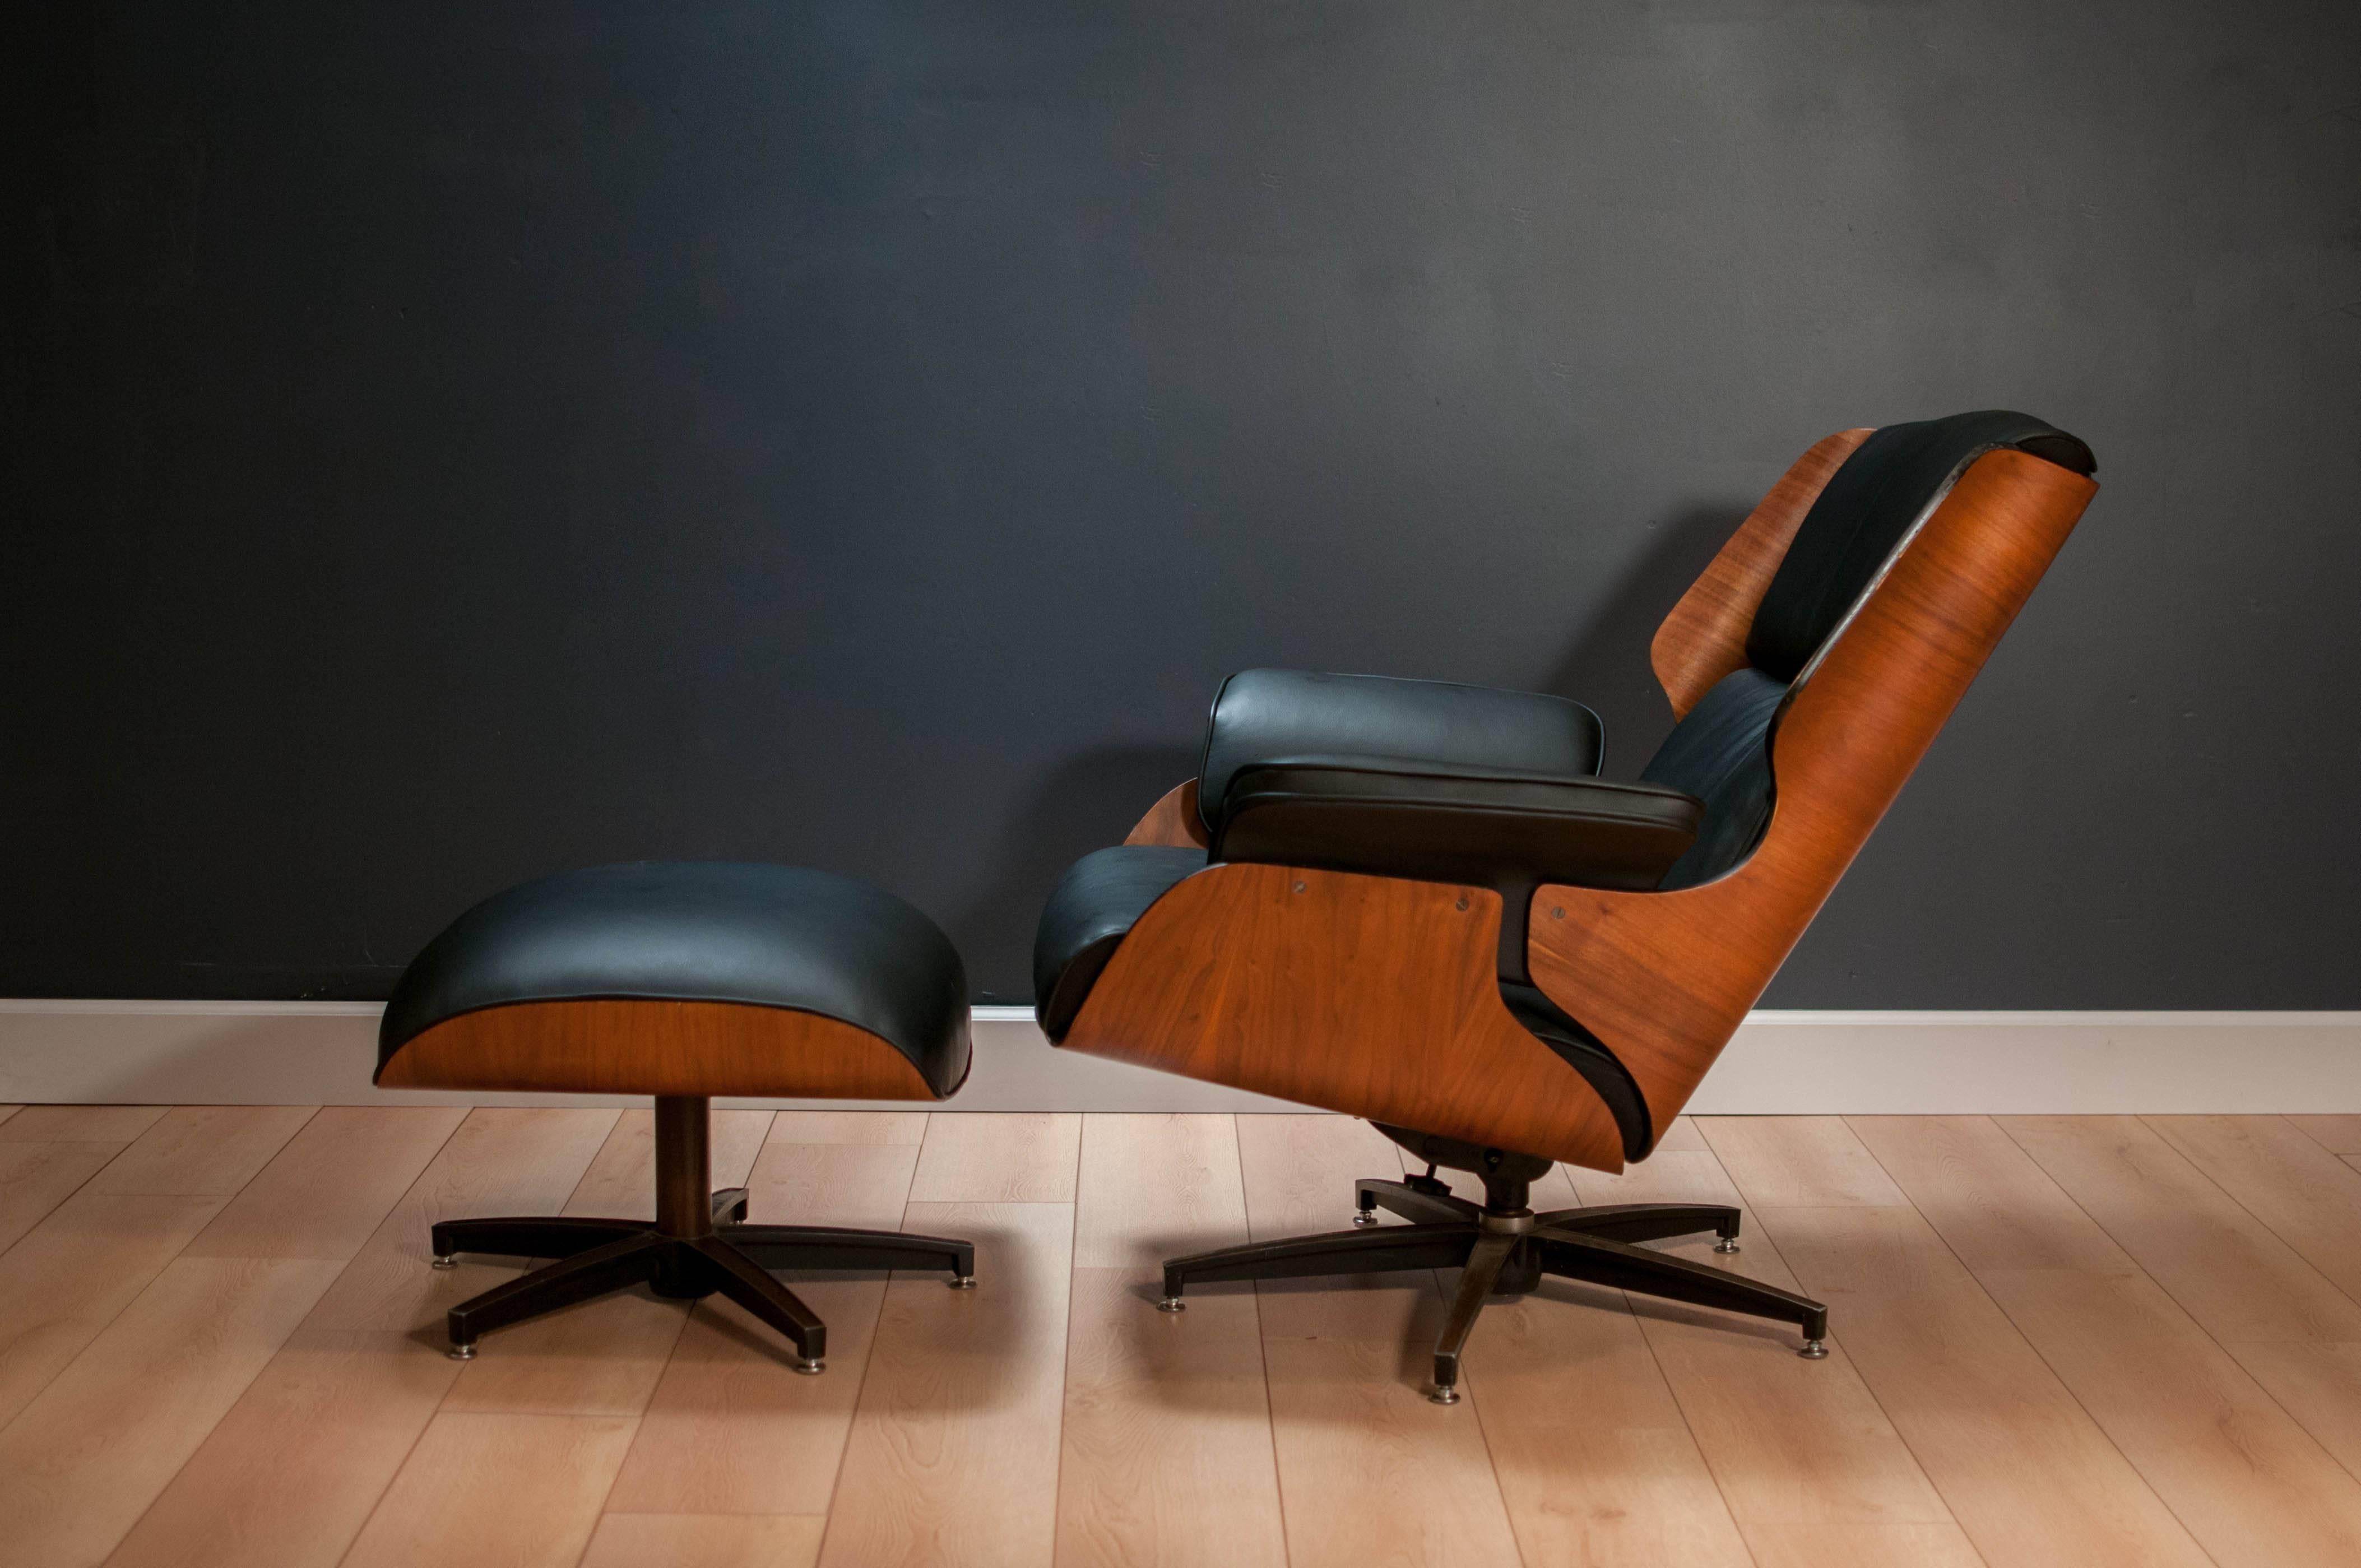 Mid-Century Modern drexel declaration lounge chair and ottoman designed by Kipp Stewart & Stewart McDougall. This piece features a stunning bent plywood frame with walnut finish. Comfortable black leather cushions are perfect for lounging.